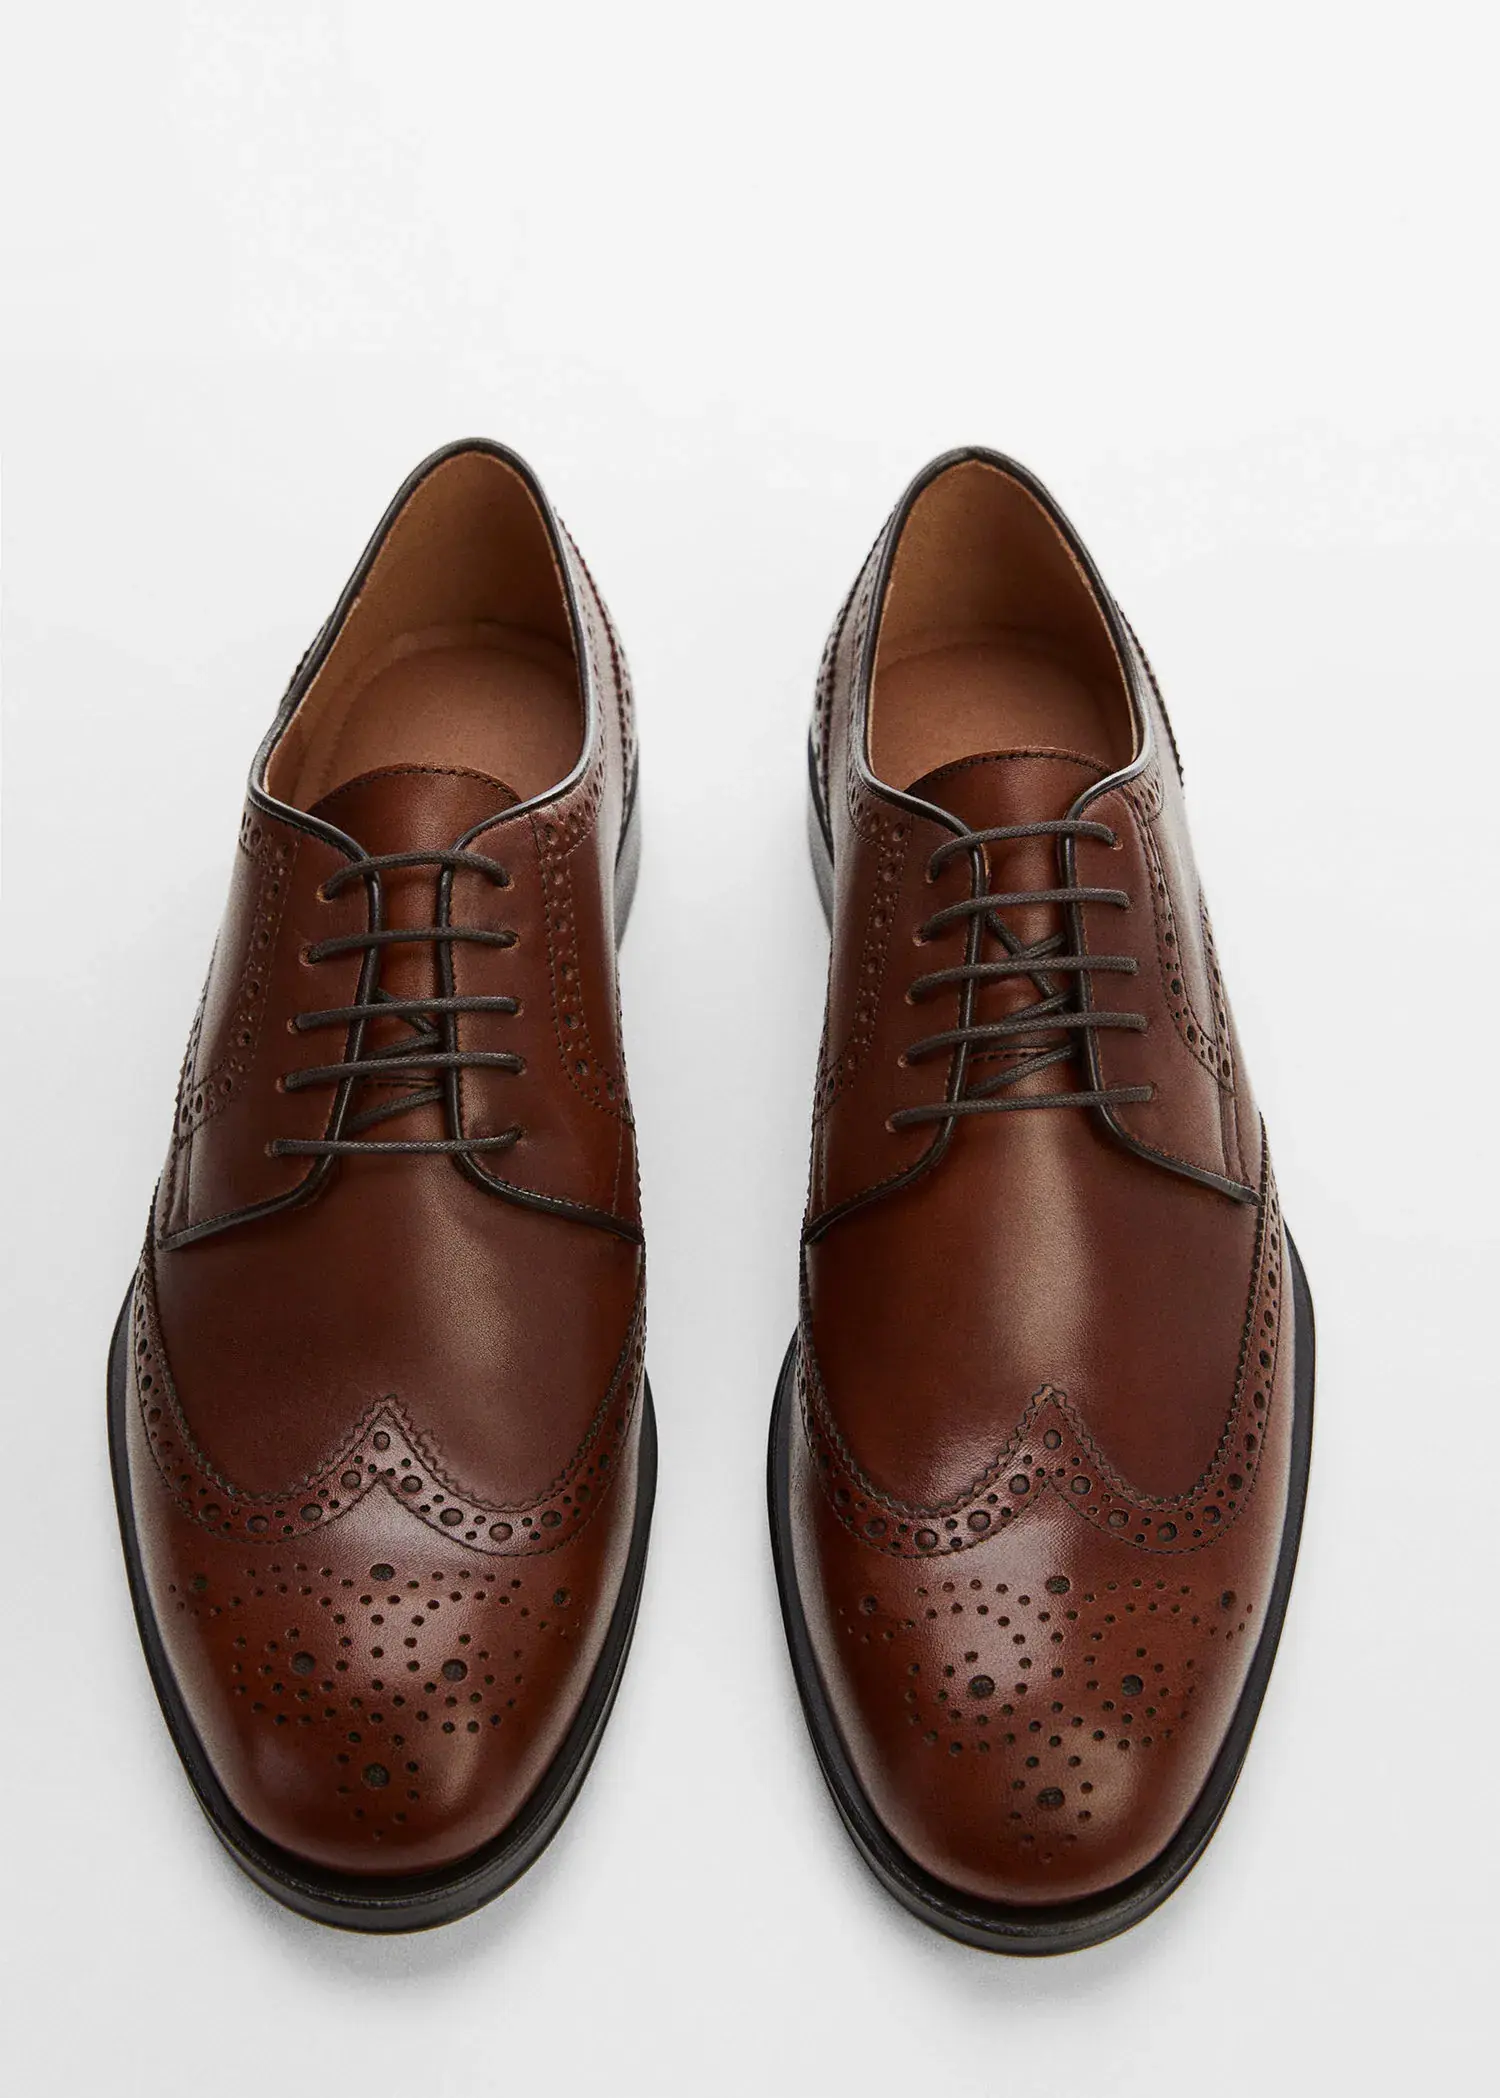 Mango Die-cut leather dress shoes. a pair of brown leather shoes on a white surface. 